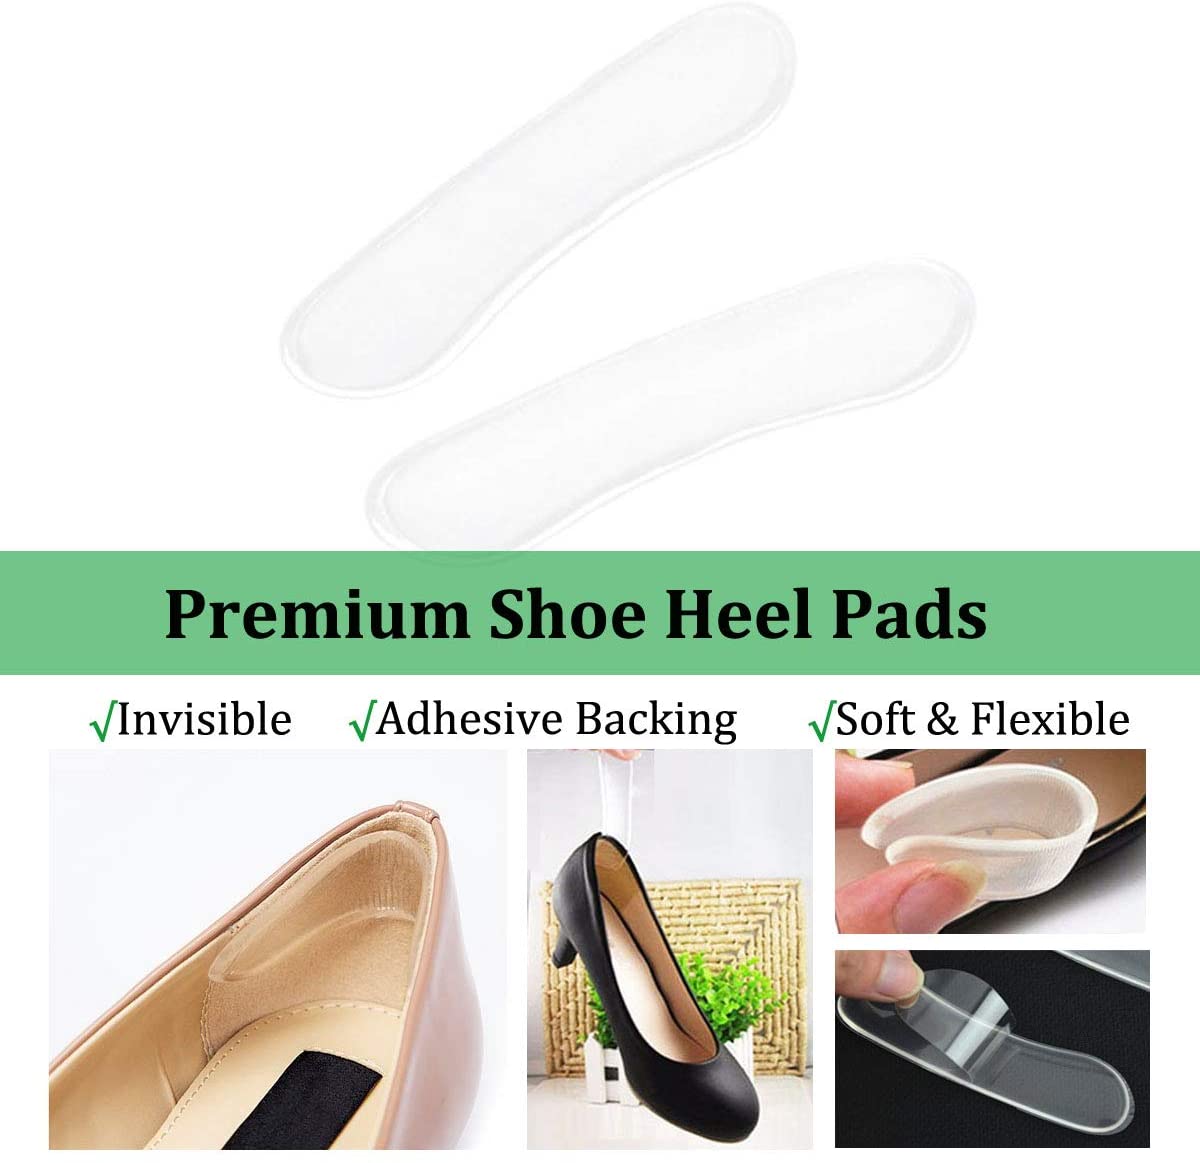 ZenToes Heel Cushion Back of Shoes Adhesive Inserts Protector